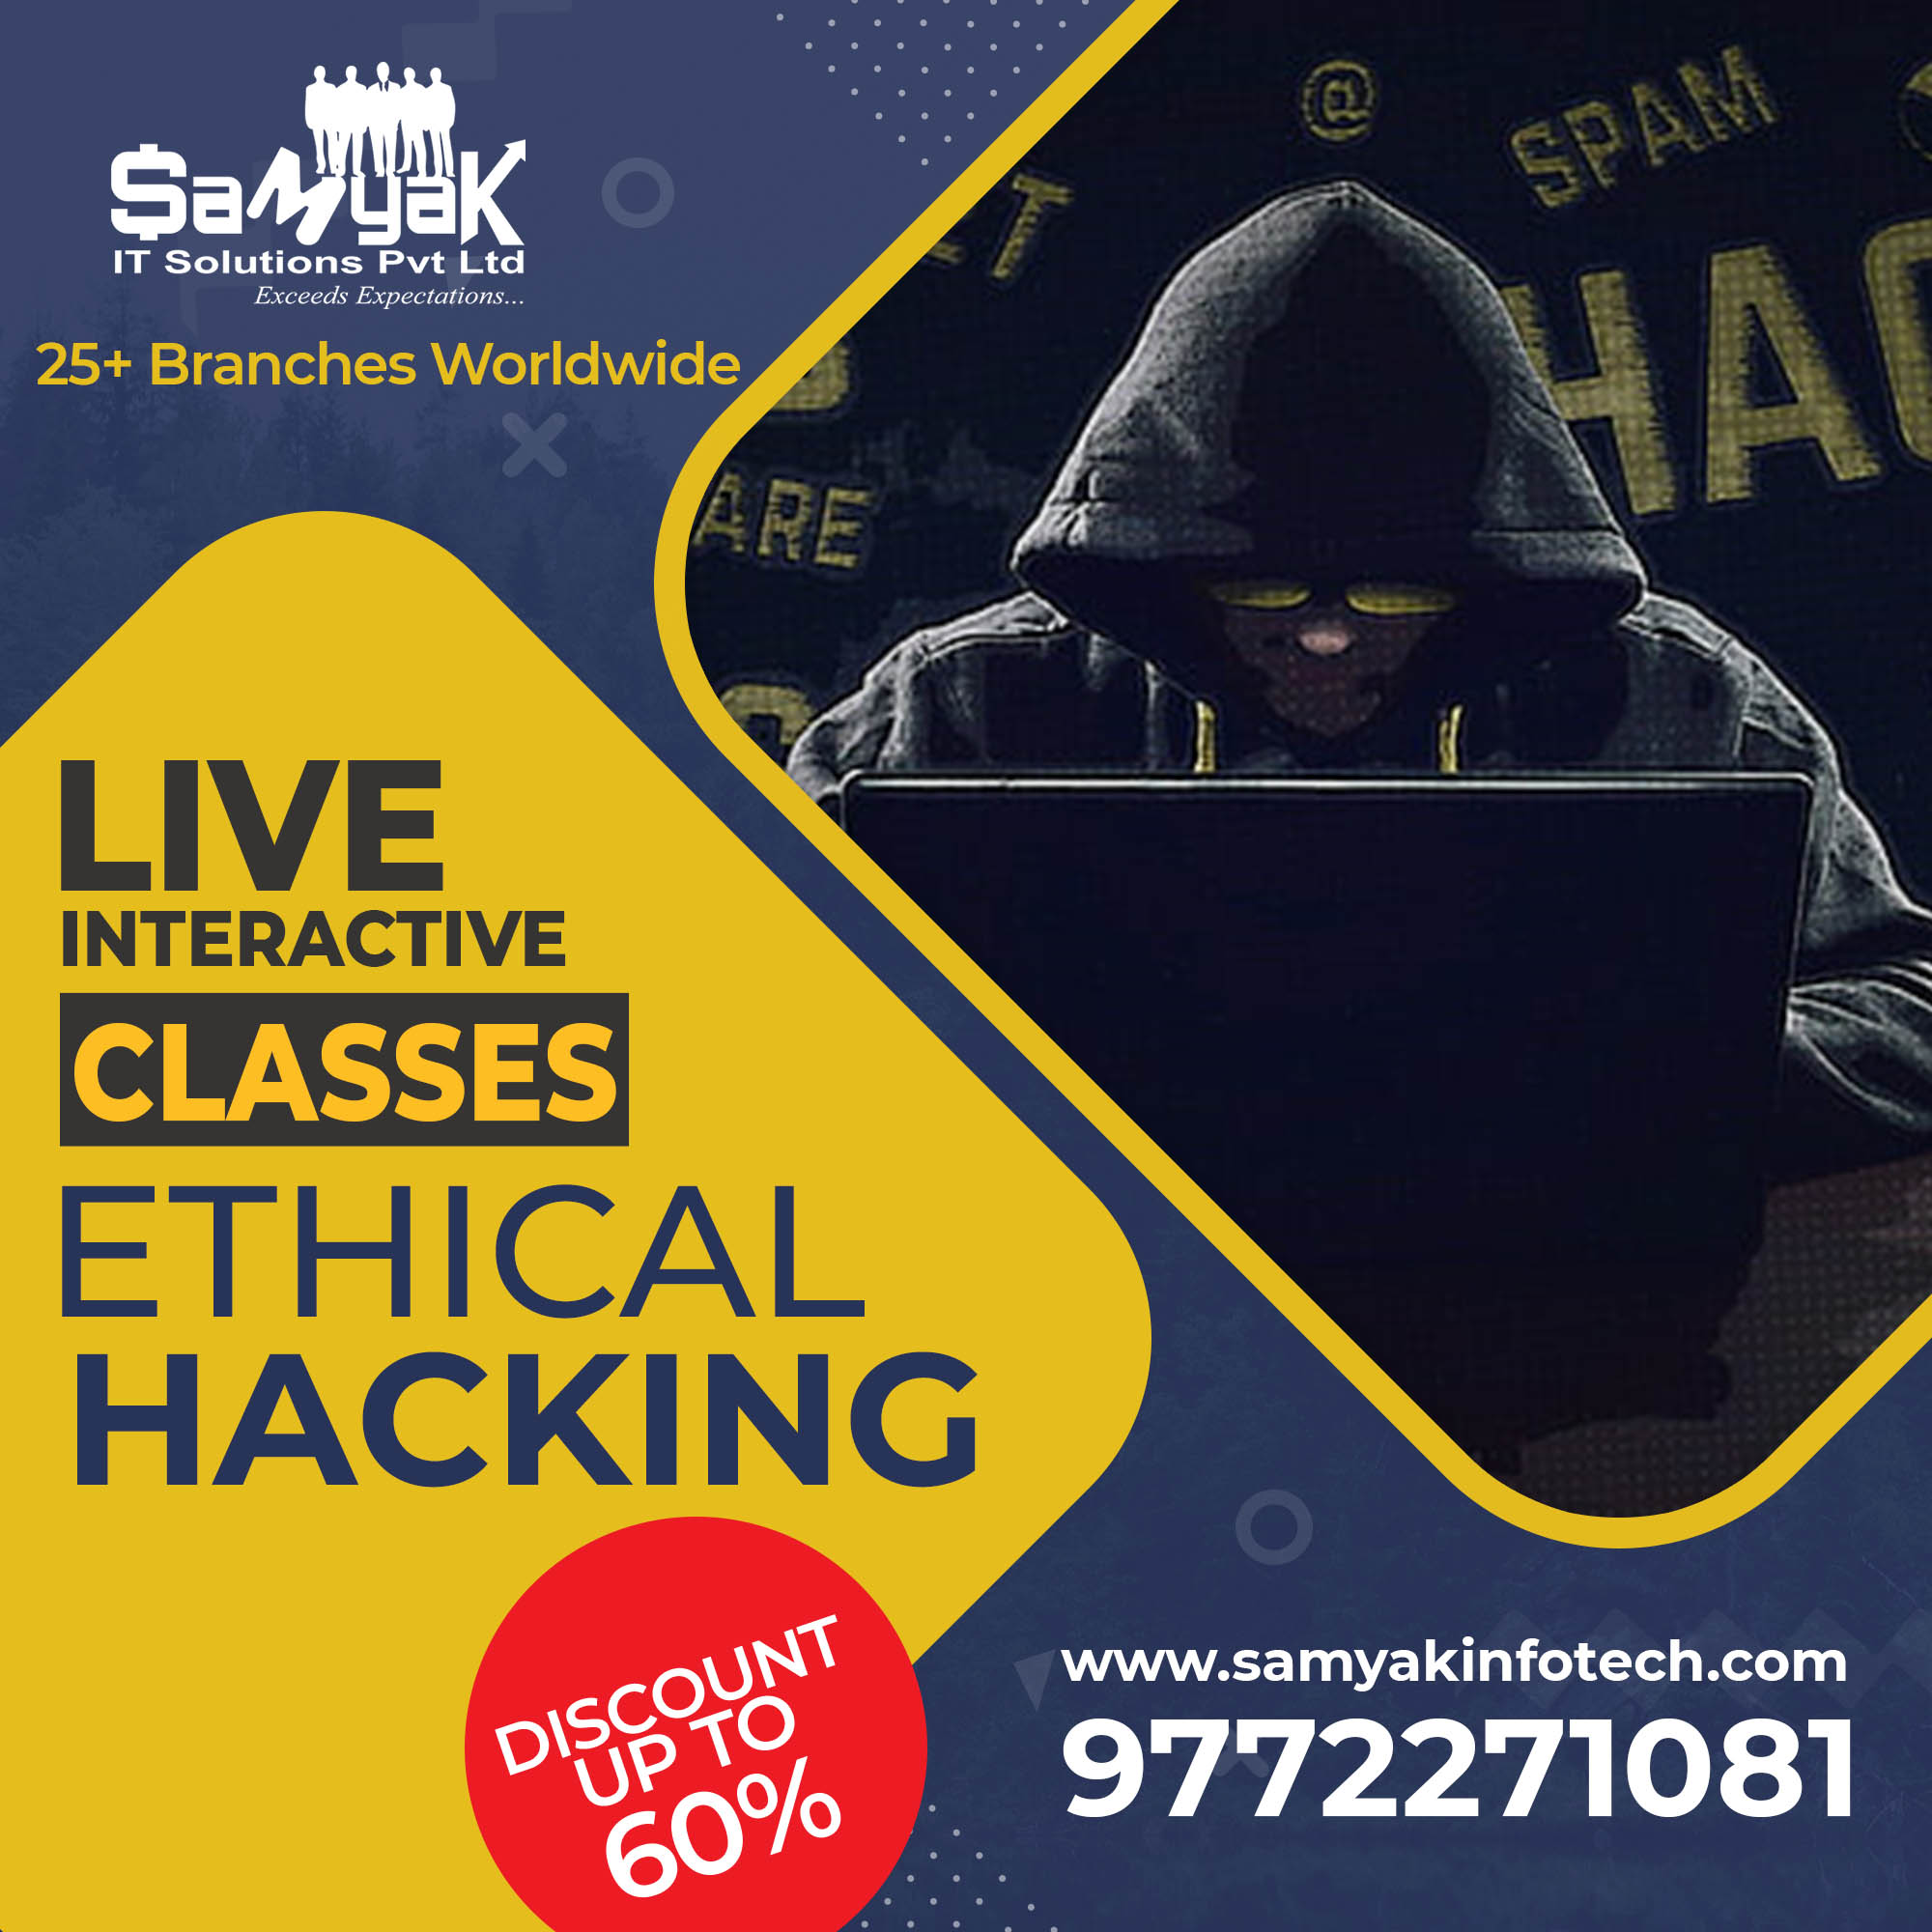 Certified Ethical Hacking Training Course | Online Hacking